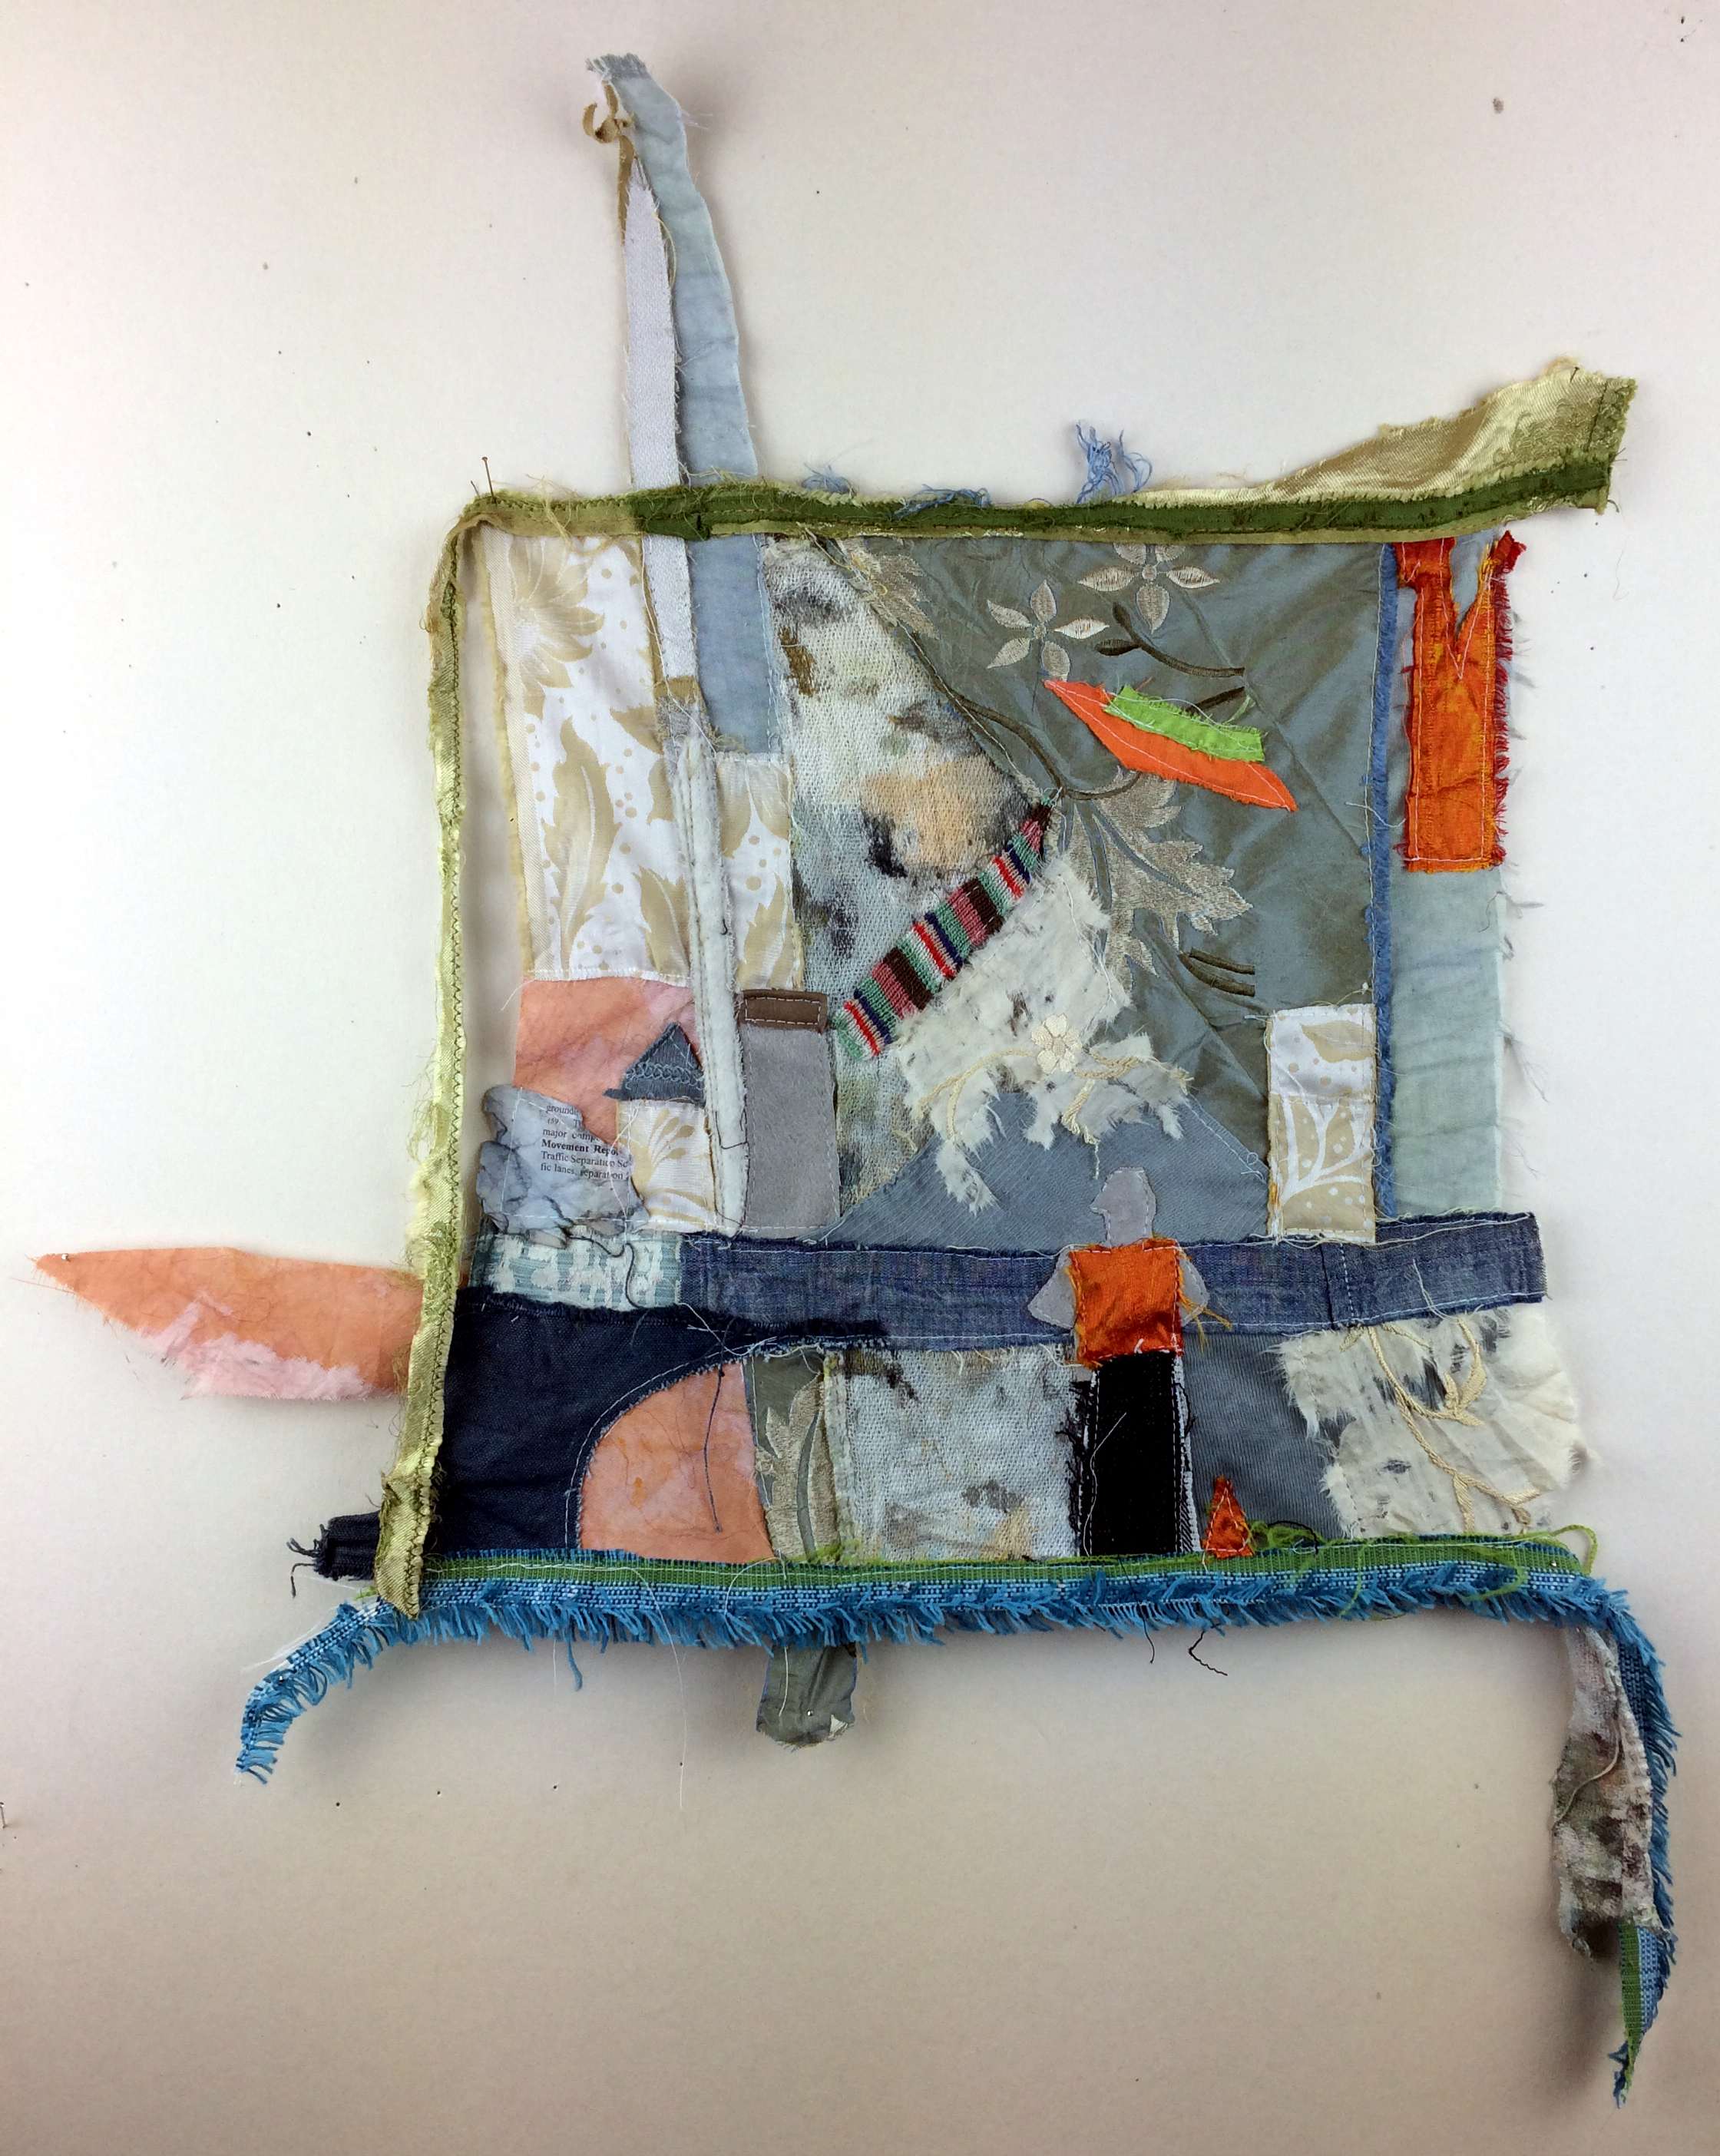 Builders by the Sea, found and dyed fabric, 20" x 19", 2017